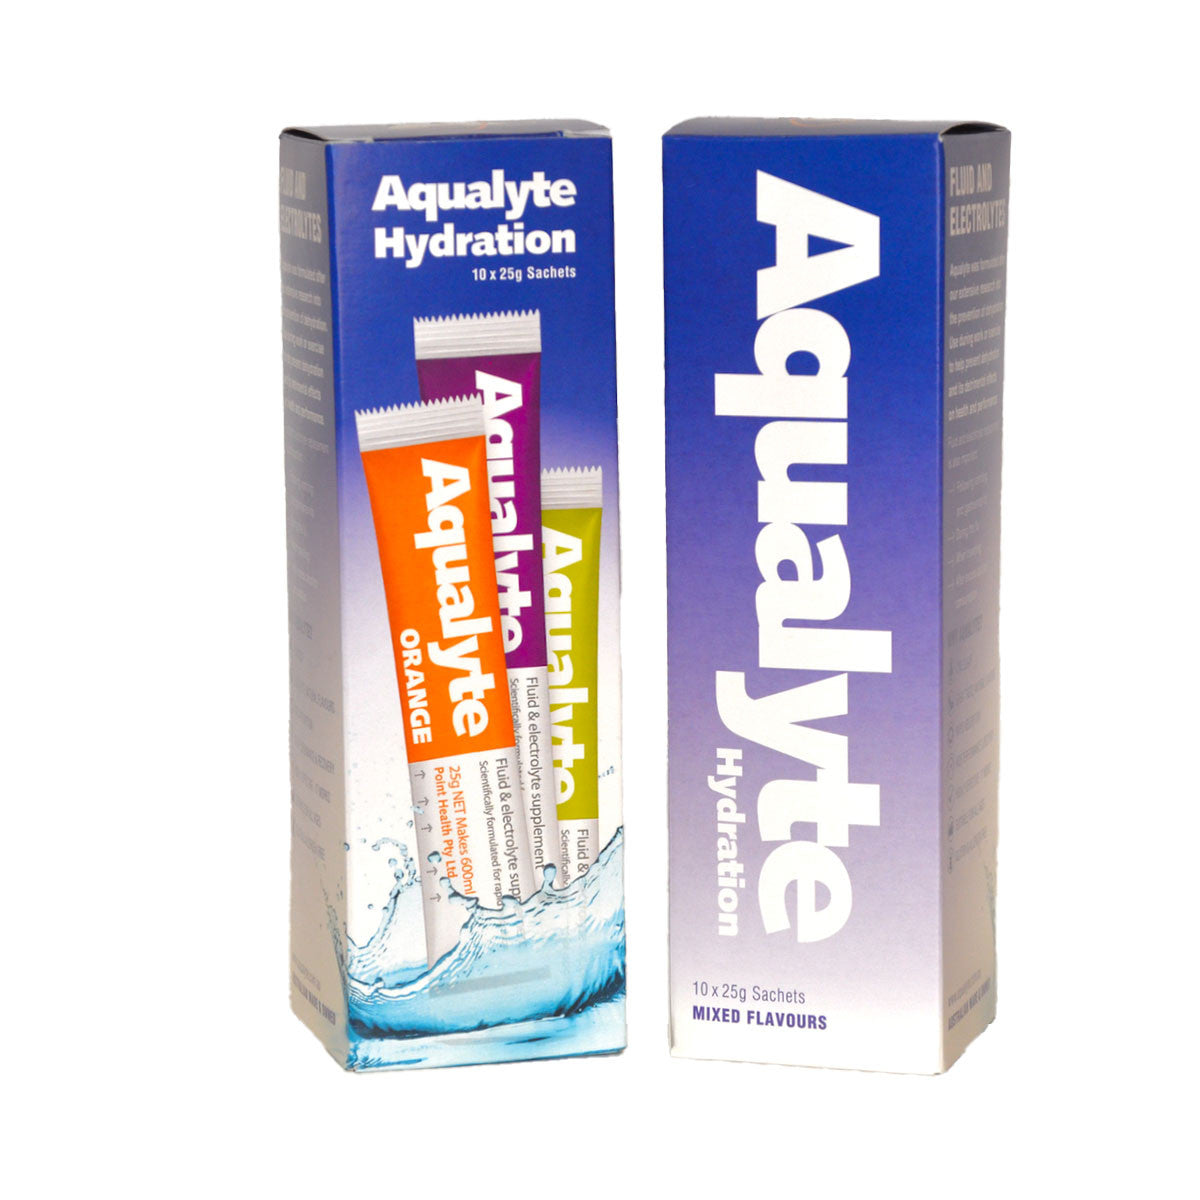 Aqualyte hydration drink 10 x 25g sachets Mixed flavours